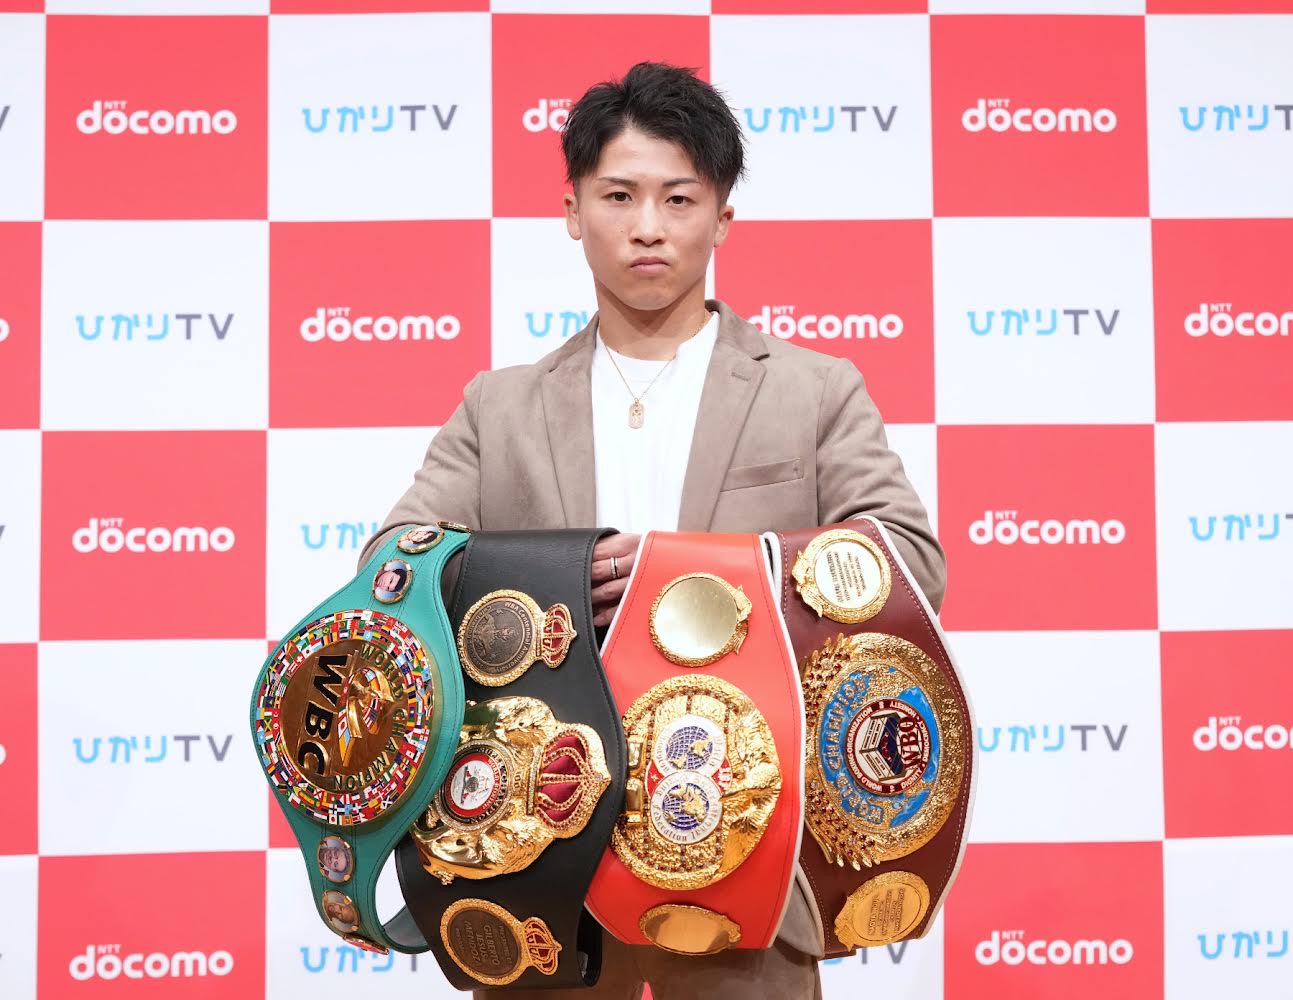 INOUE CLOSED THE YEAR ON A HIGH NOTE